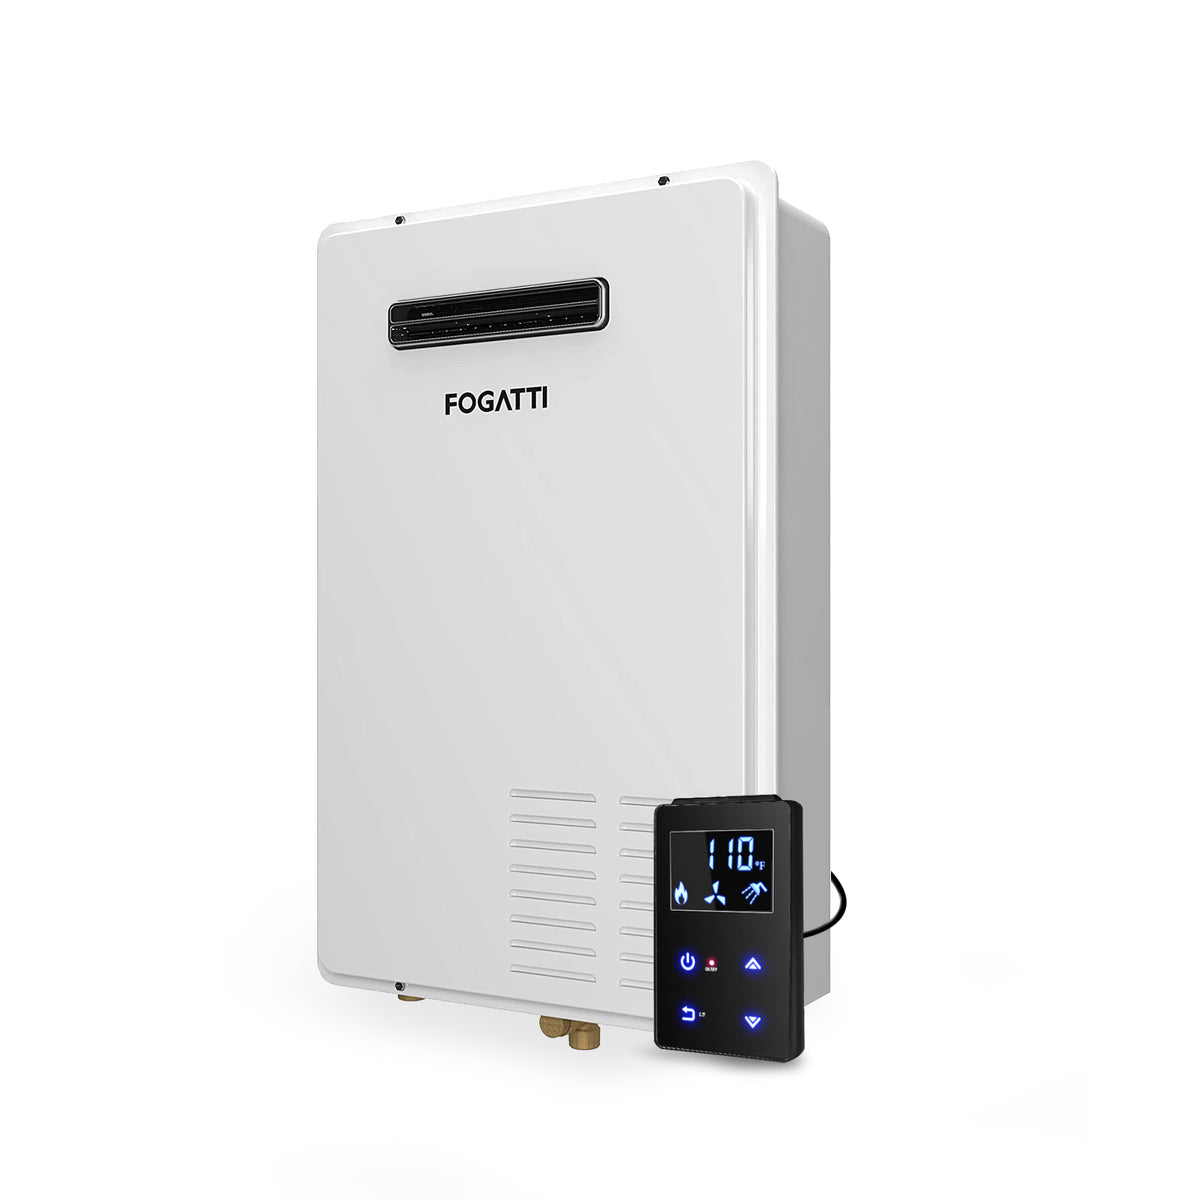 Propane Gas Tankless Water Heater, FOGATTI Outdoor 7.5 GPM, 170,000 BTU White Instant Hot Water Heater, InstaGas Comfort 170S Series